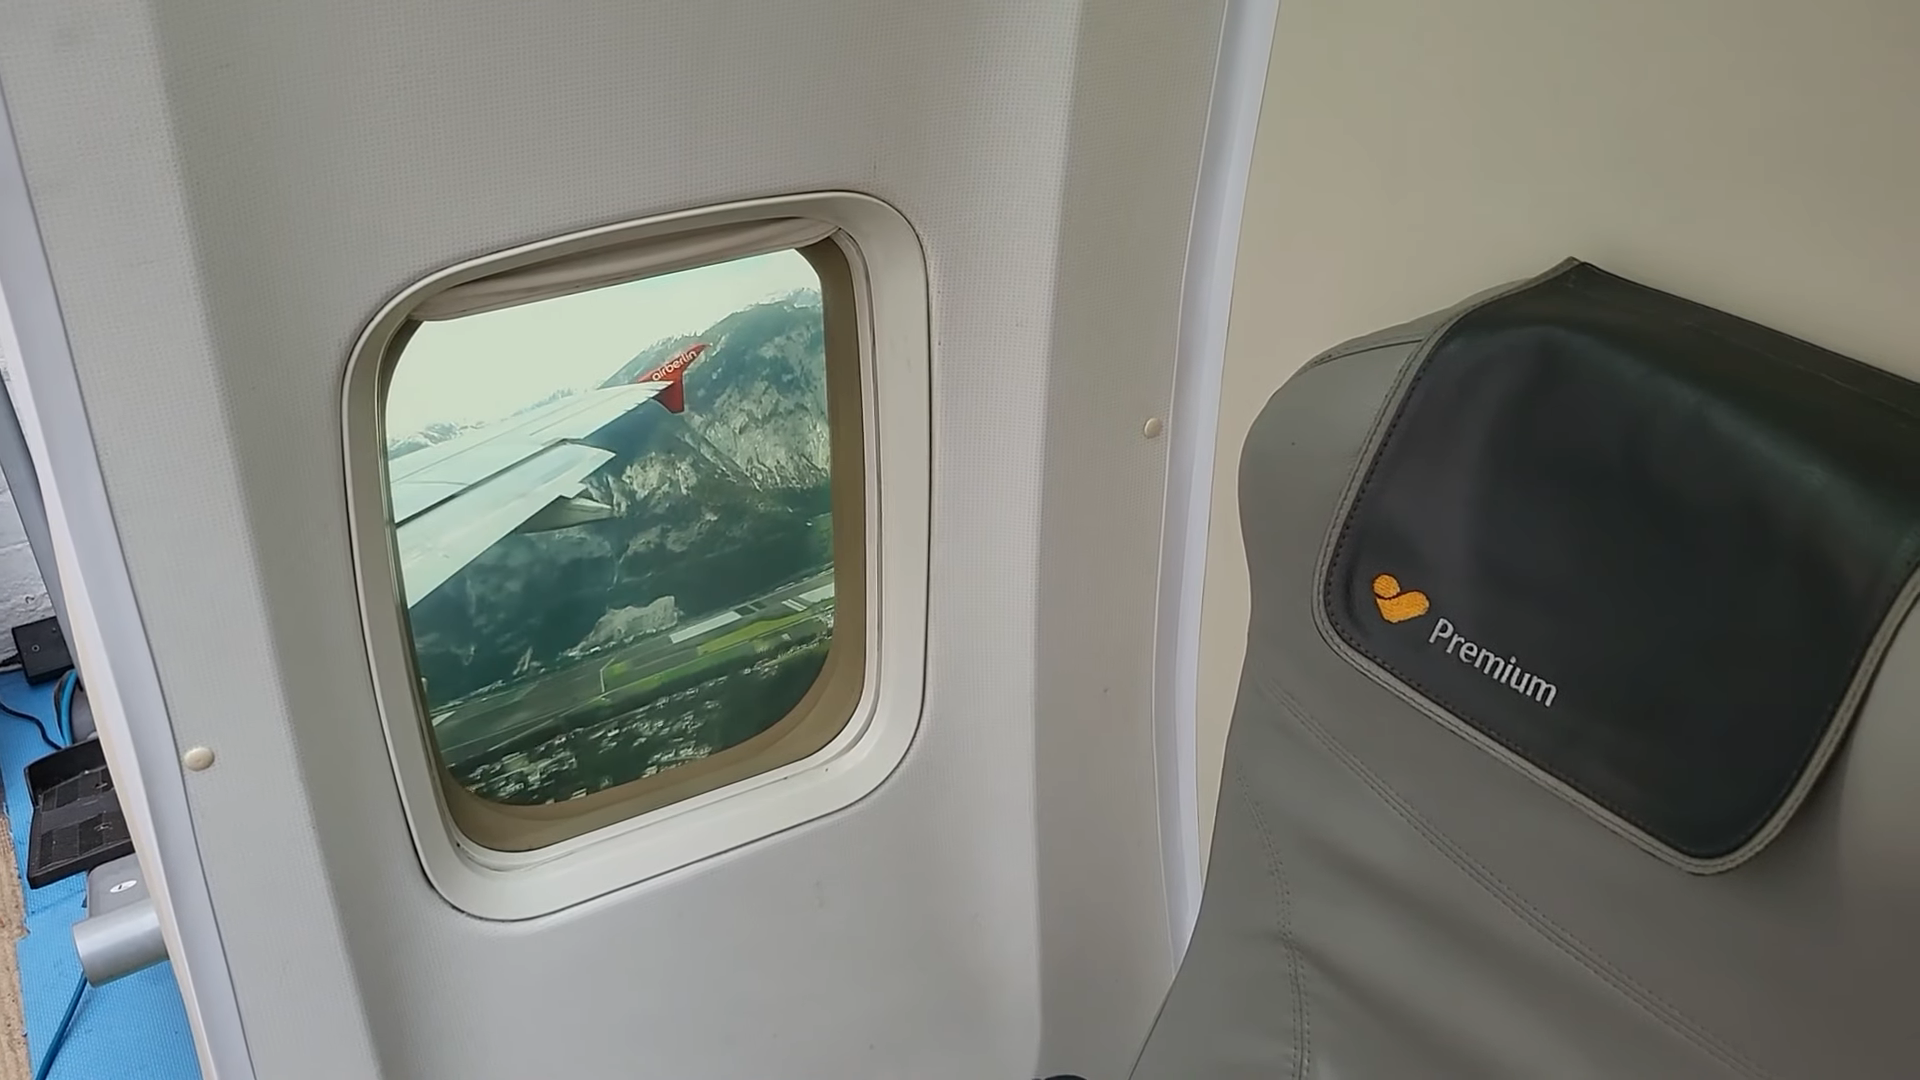 Flight Simulator focuses on the other side of the cockpit door